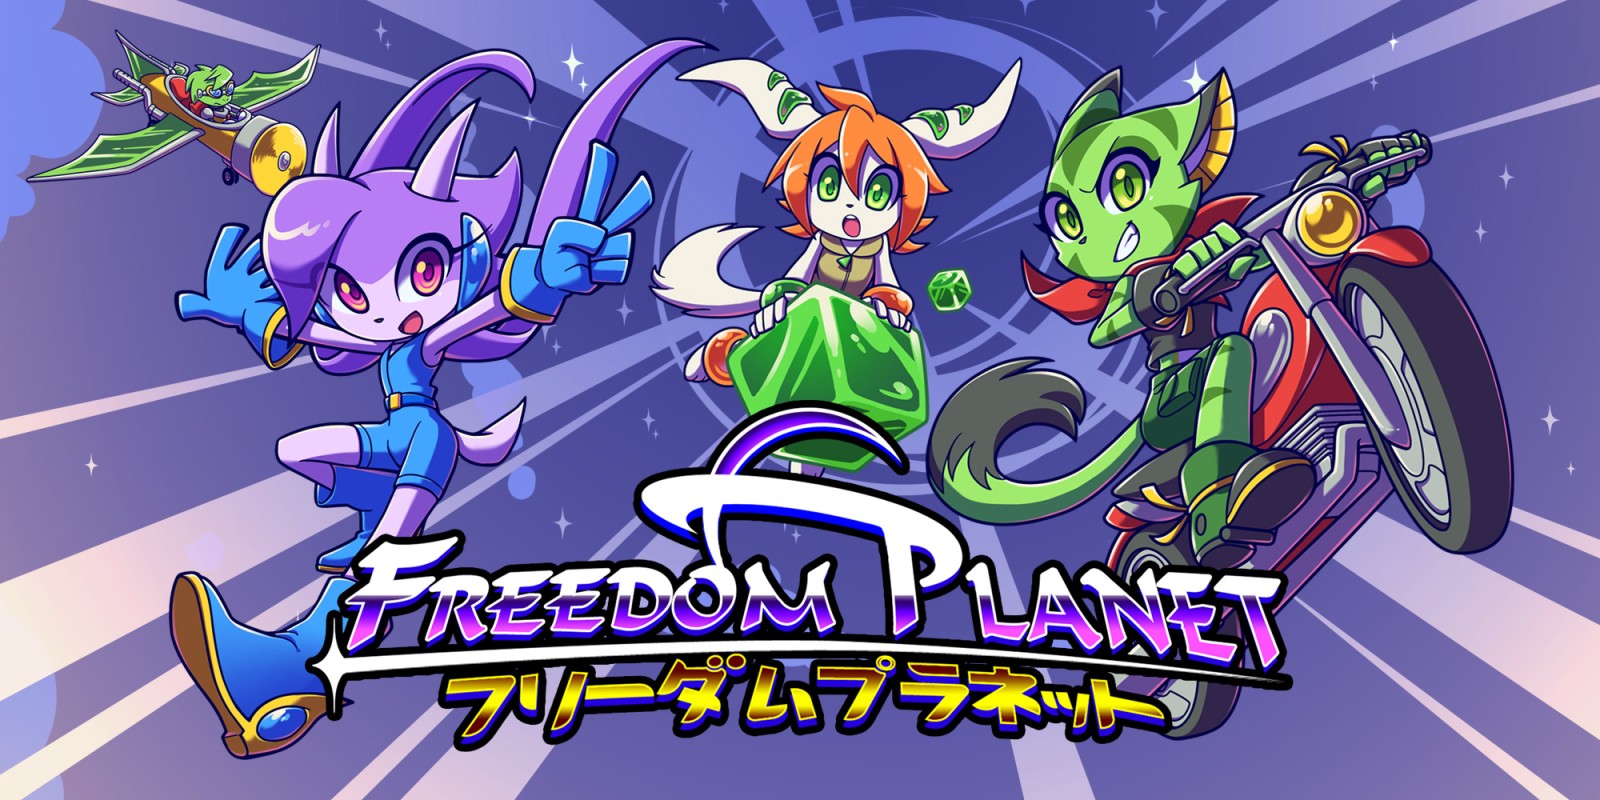 Figure 5 - Freedom Planet opening screen